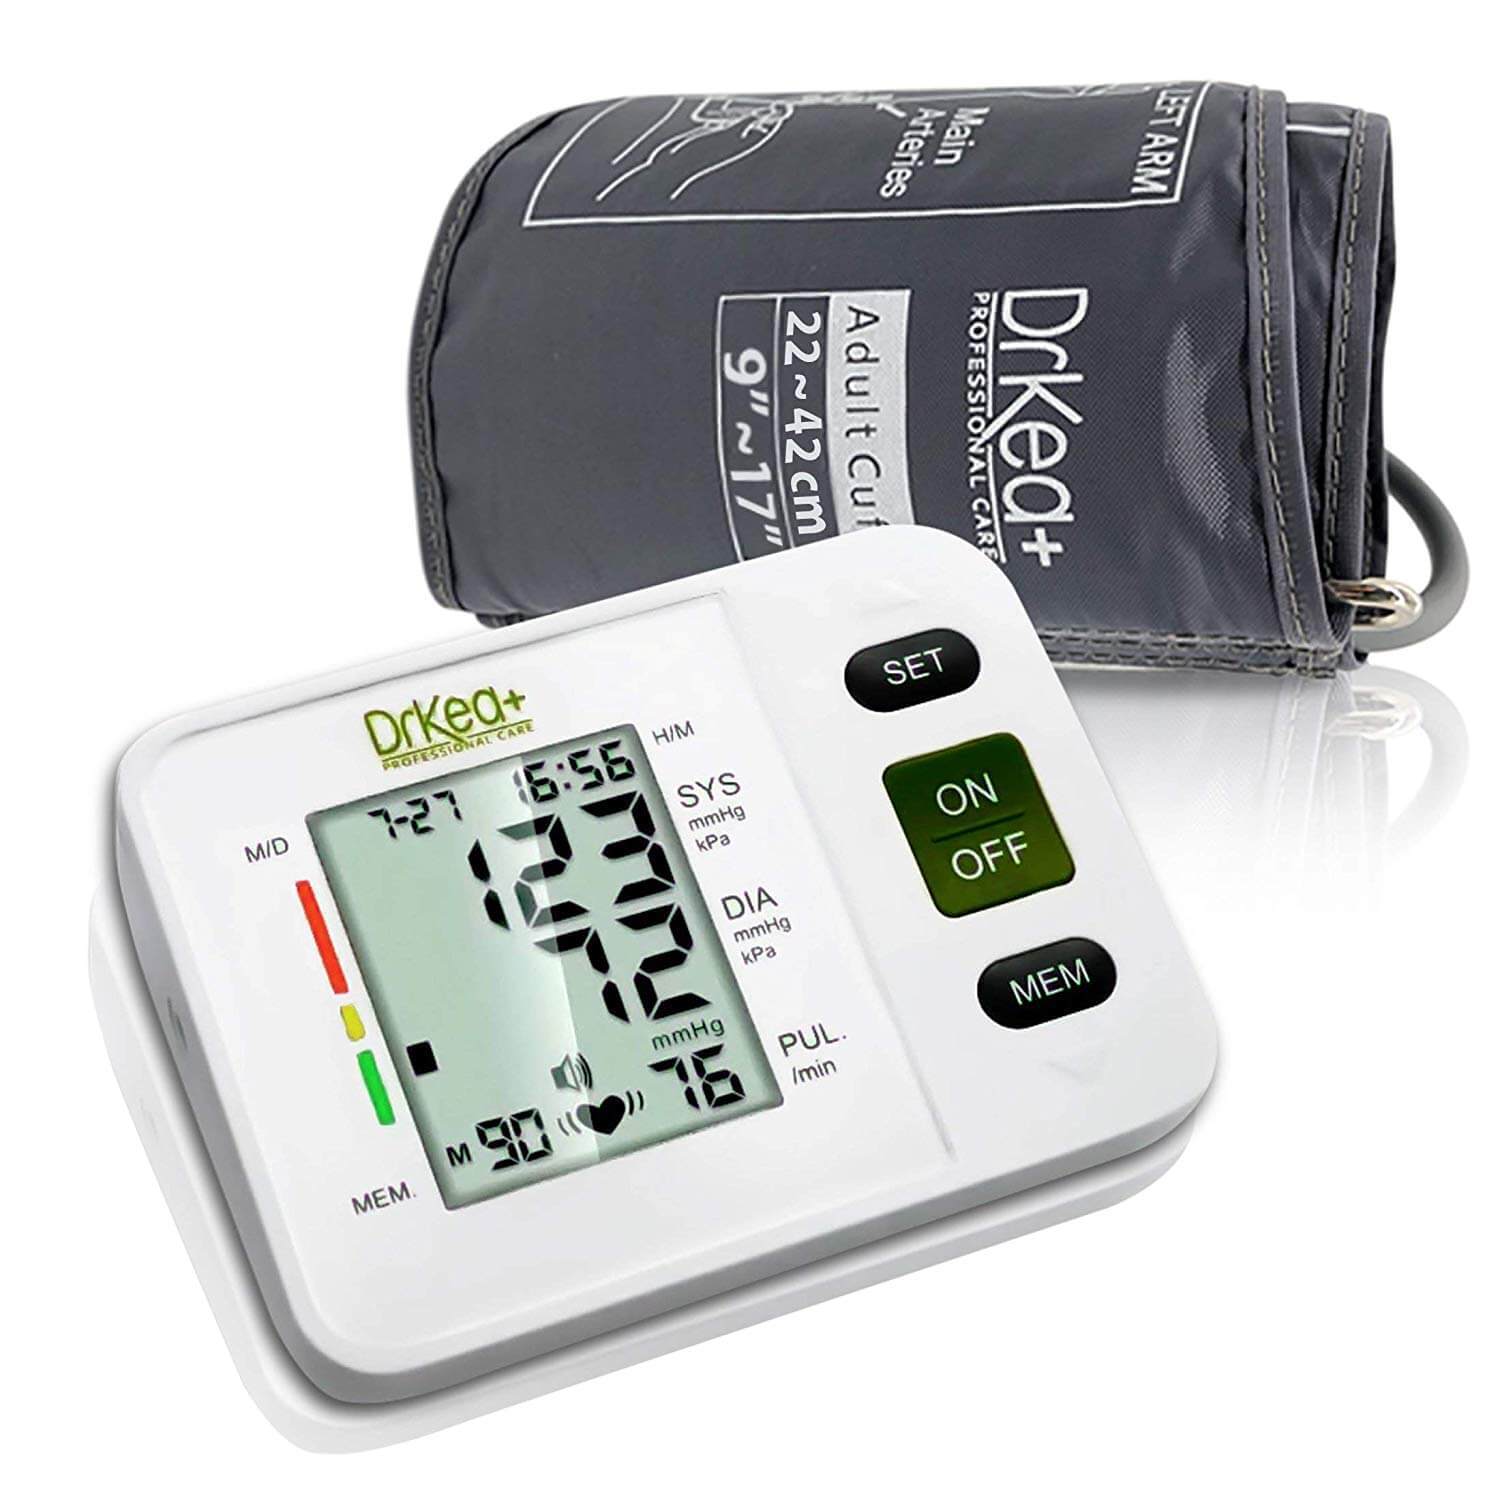 Reliable Upper Arm Blood Pressure Monitor